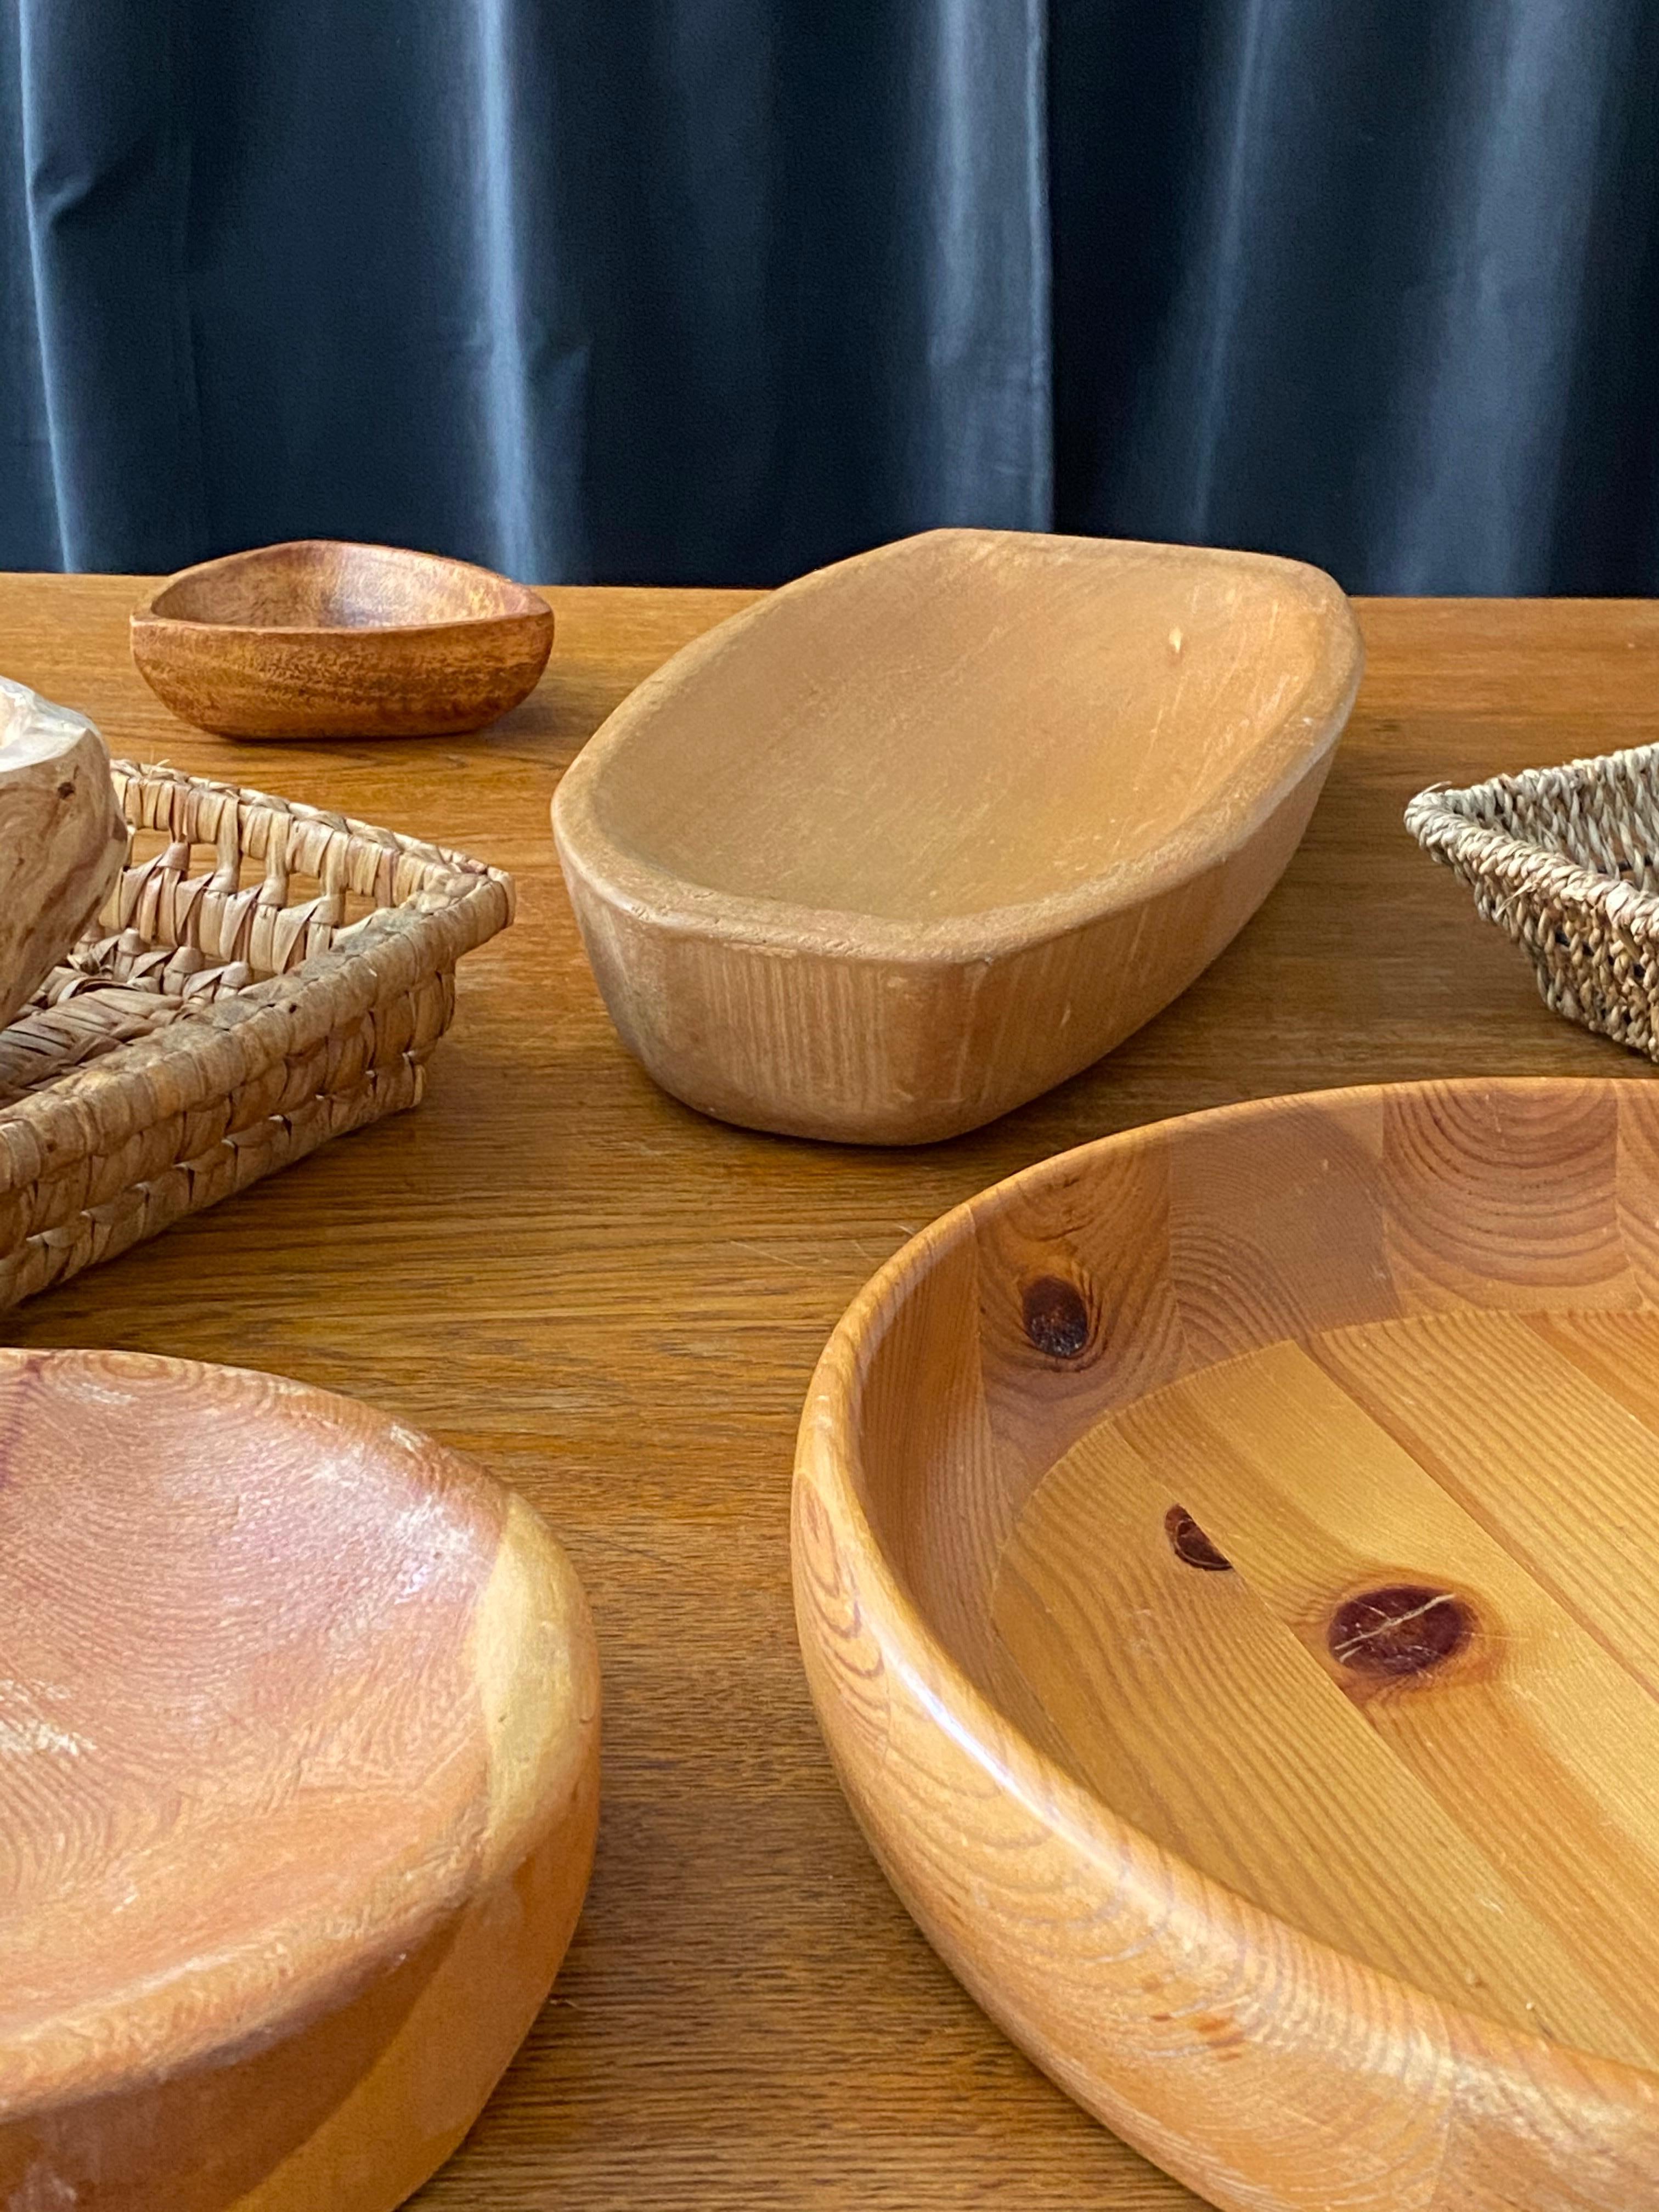 Mid-20th Century Swedish, Collection of Bowls, Dishes, Trays, Wood, Rope, Rattan, Midcentury